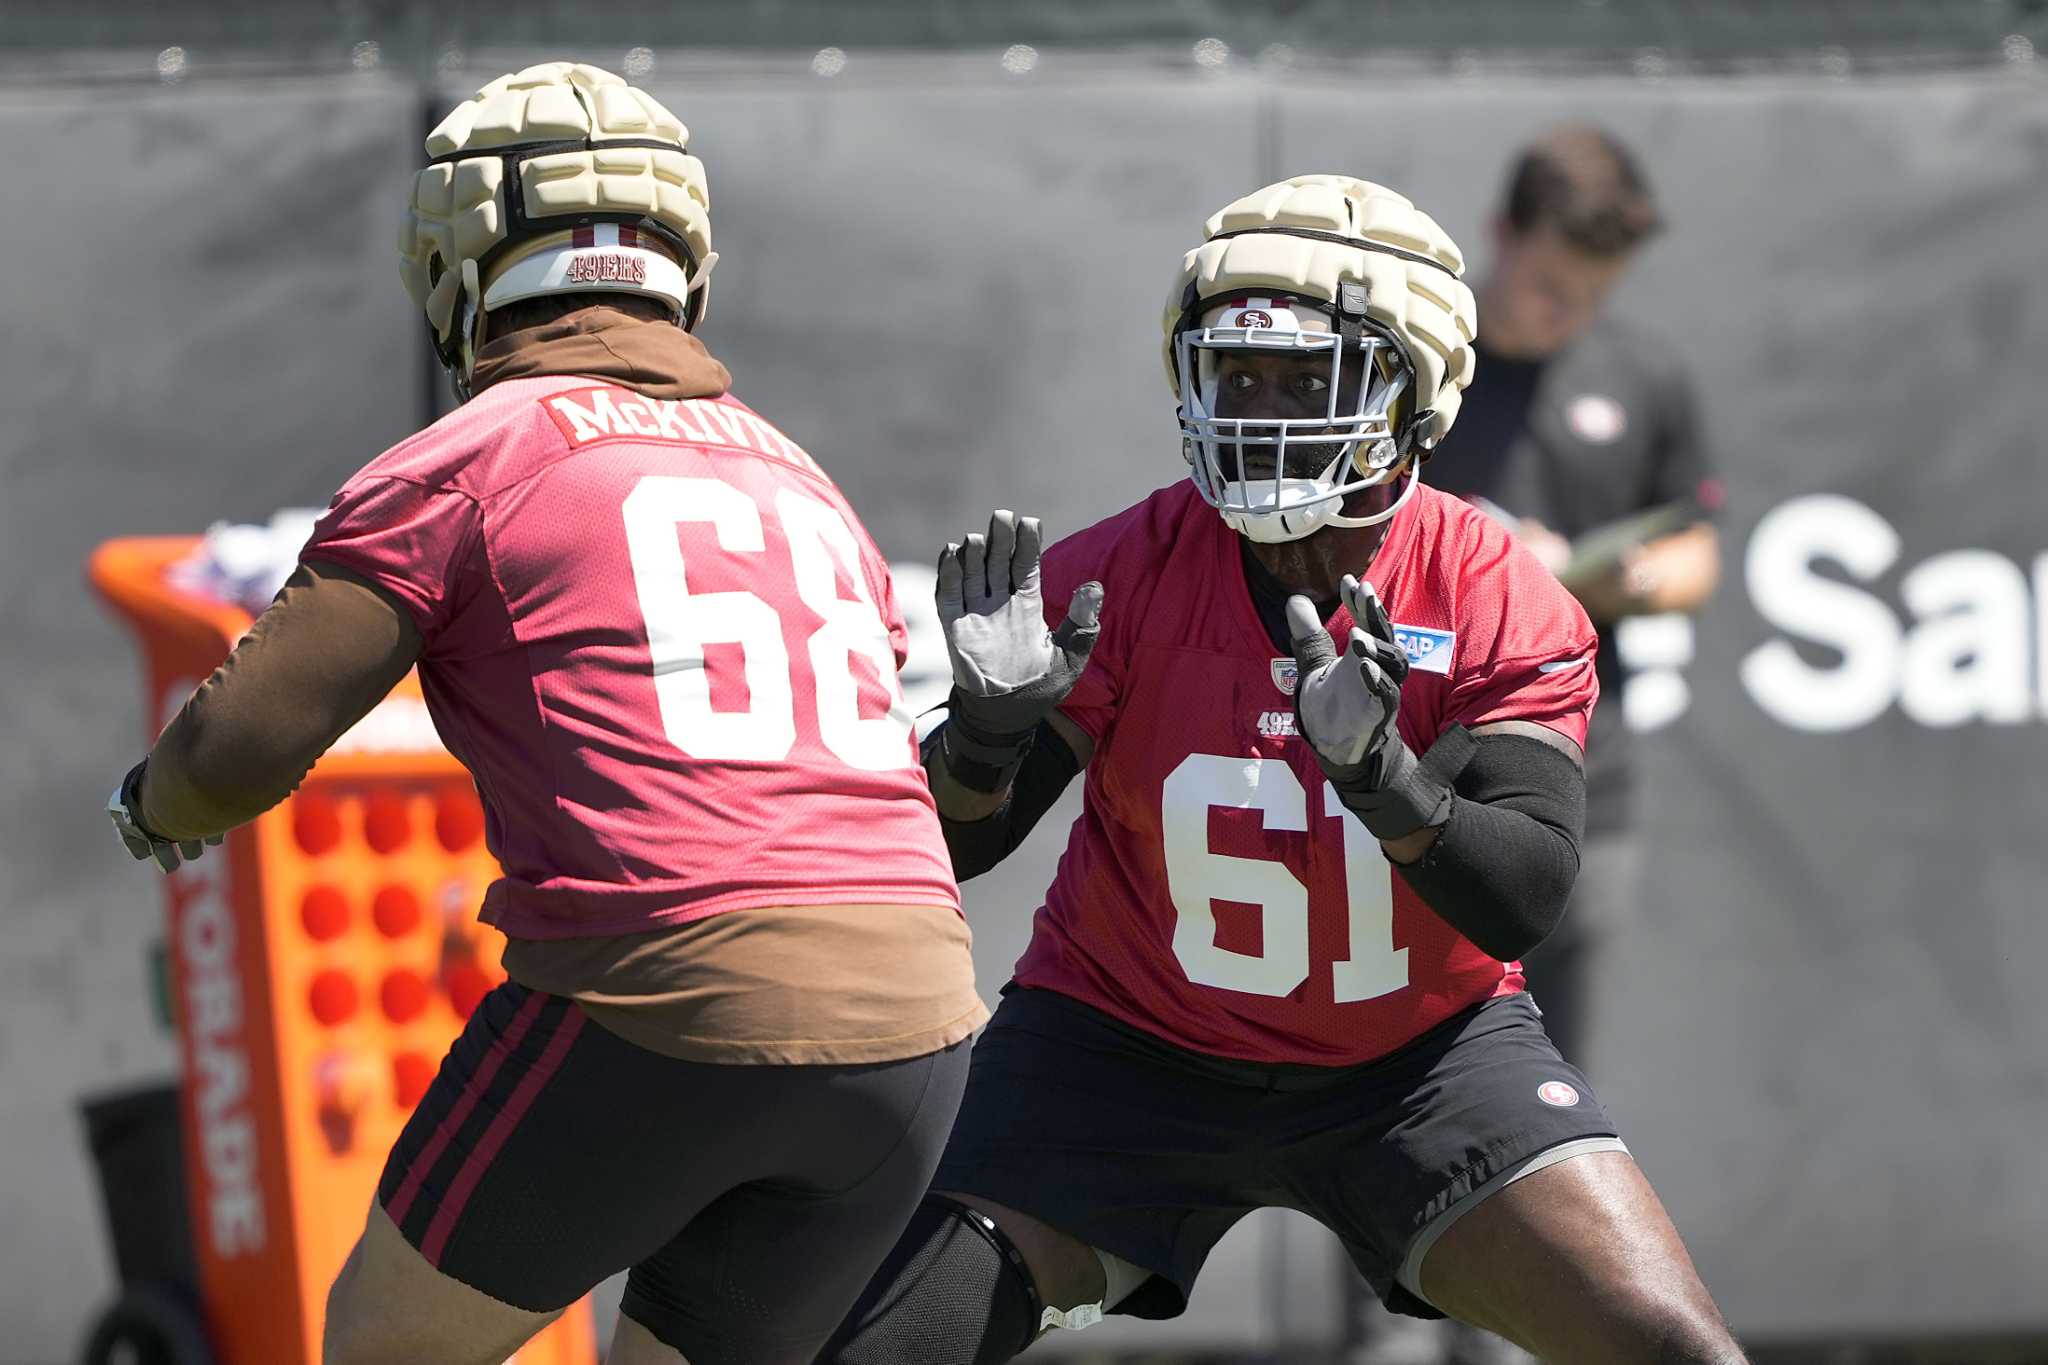 49ers OL coach explains why the team didn't need to make a big investment to upgrade the line